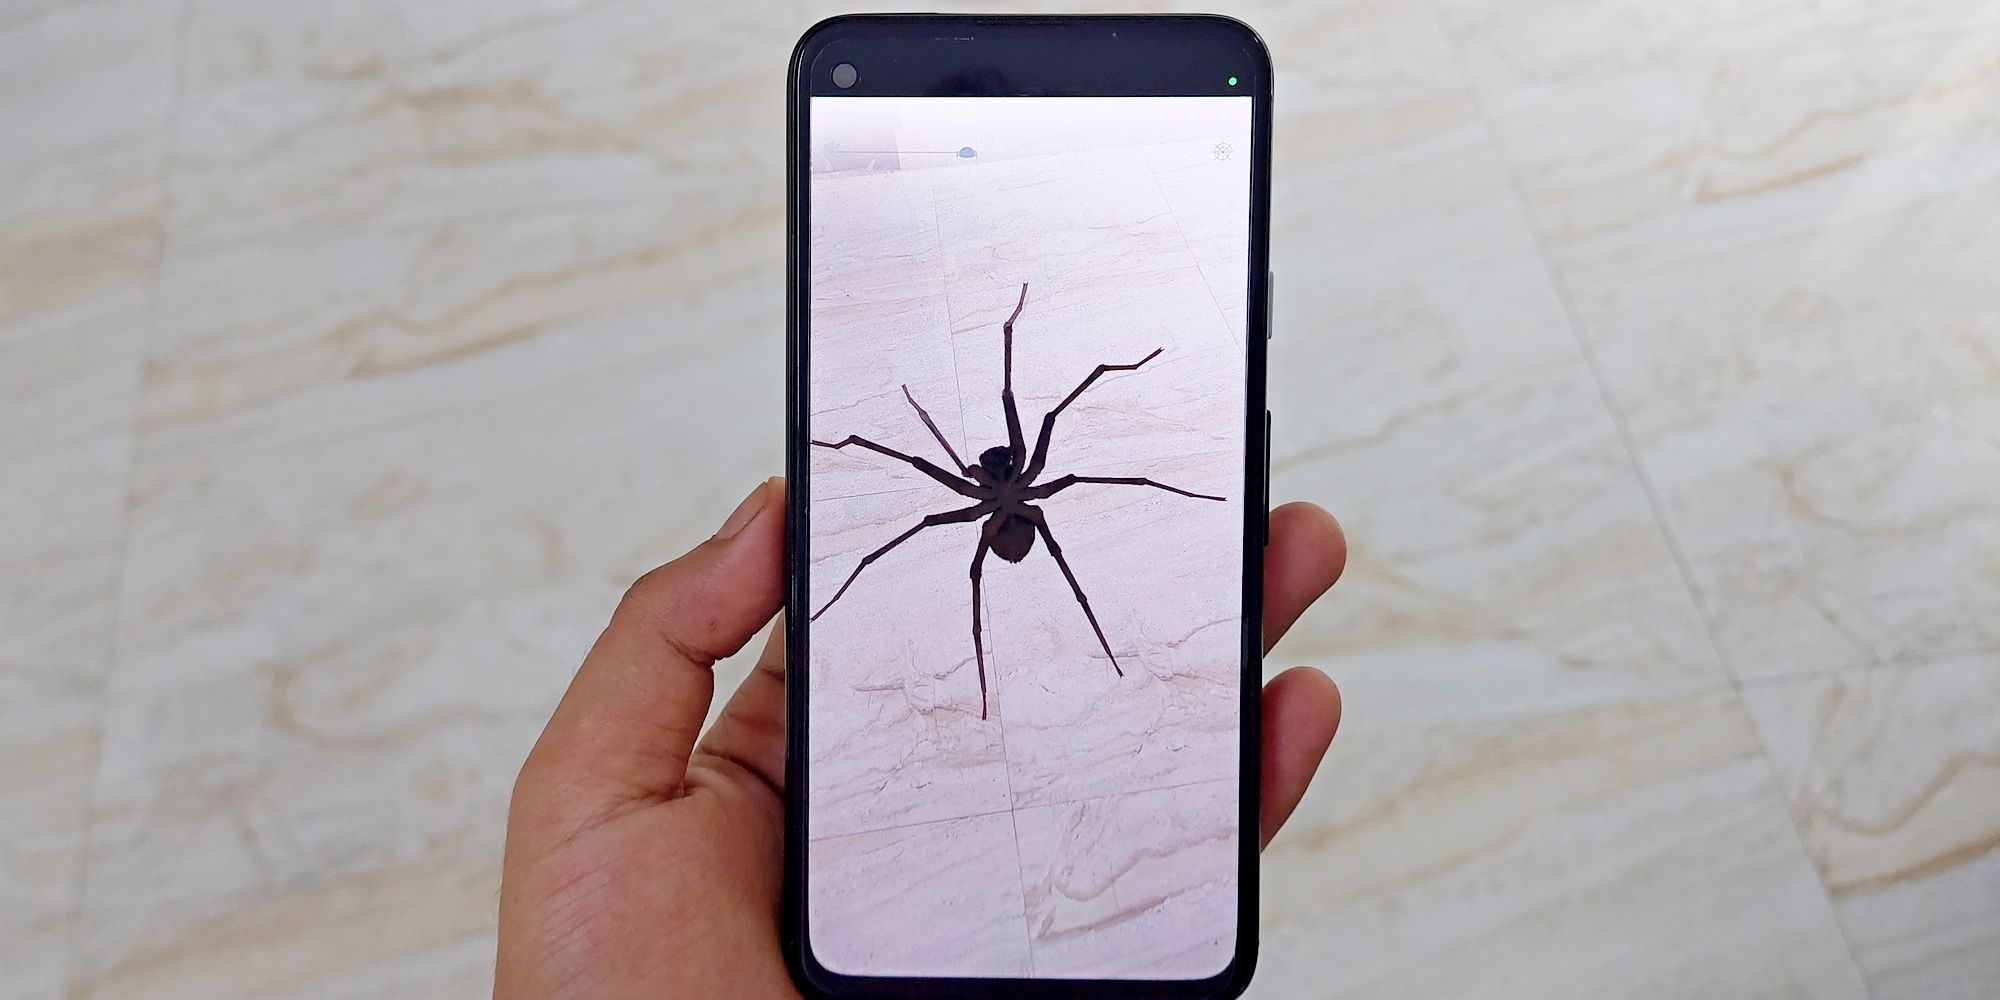 This AR App Will Help Your Arachnophobia Or Maybe Just Make It Worse